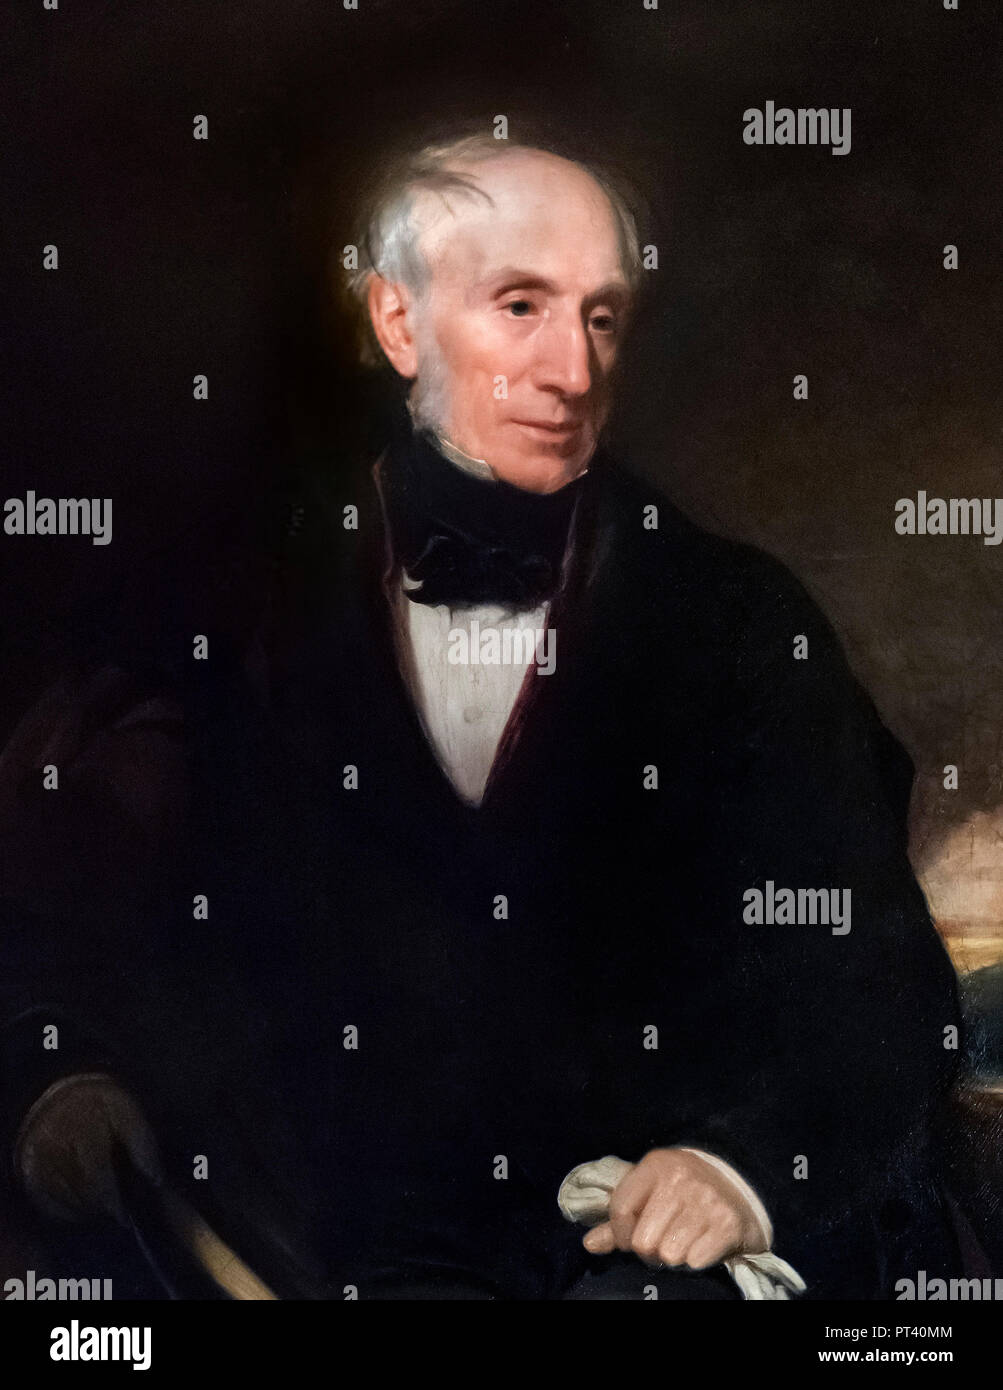 William Wordsworth (1770-1850) by Henry William Pickersgill, oil on canvas, c.1840. Stock Photo